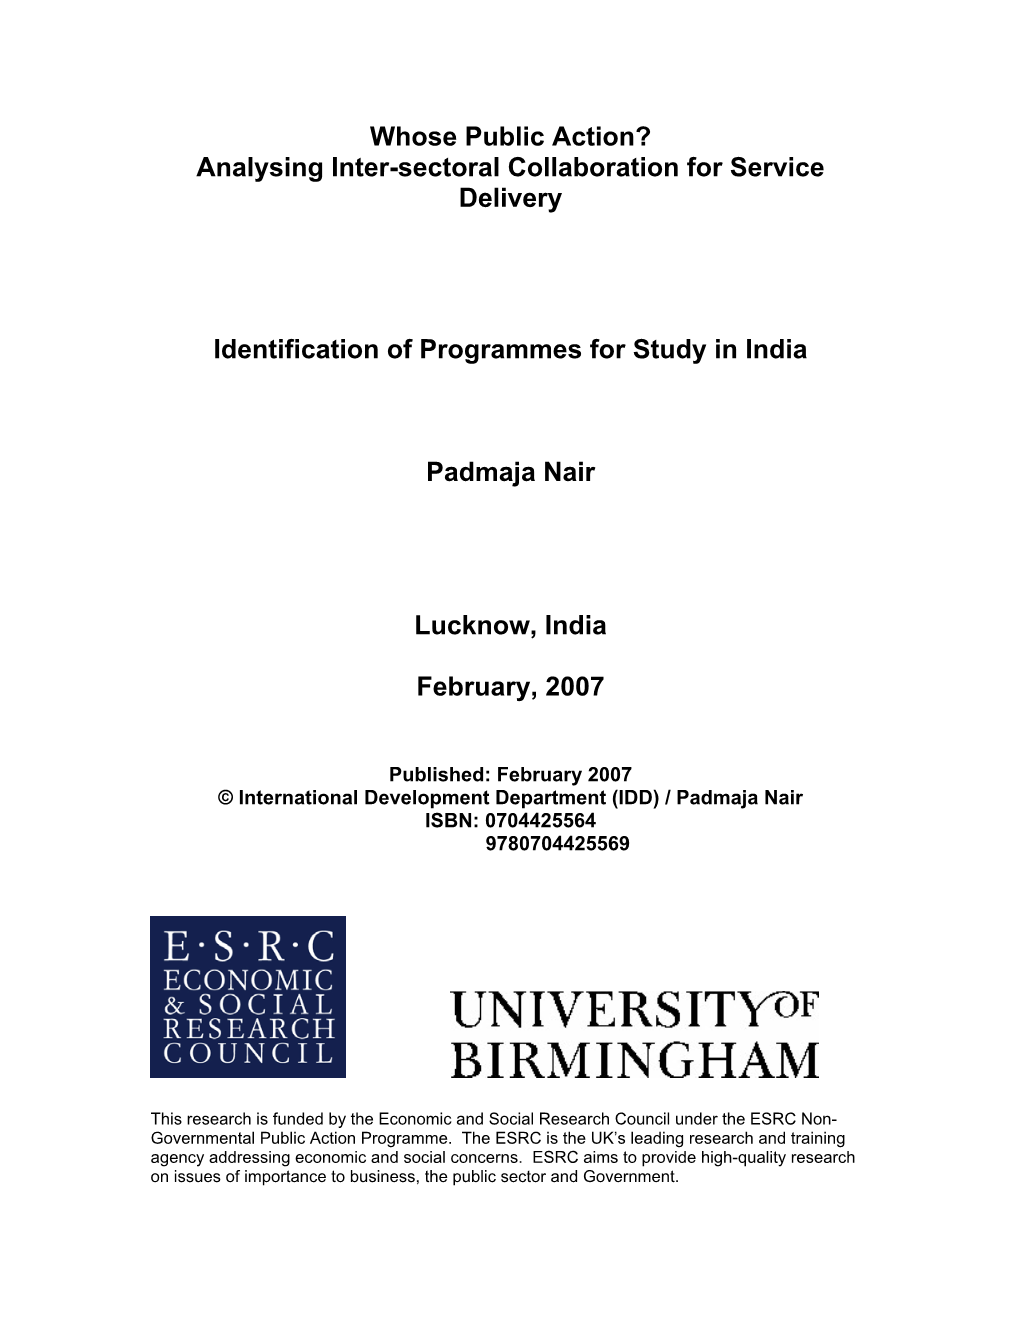 Identification of Programmes for Study in India